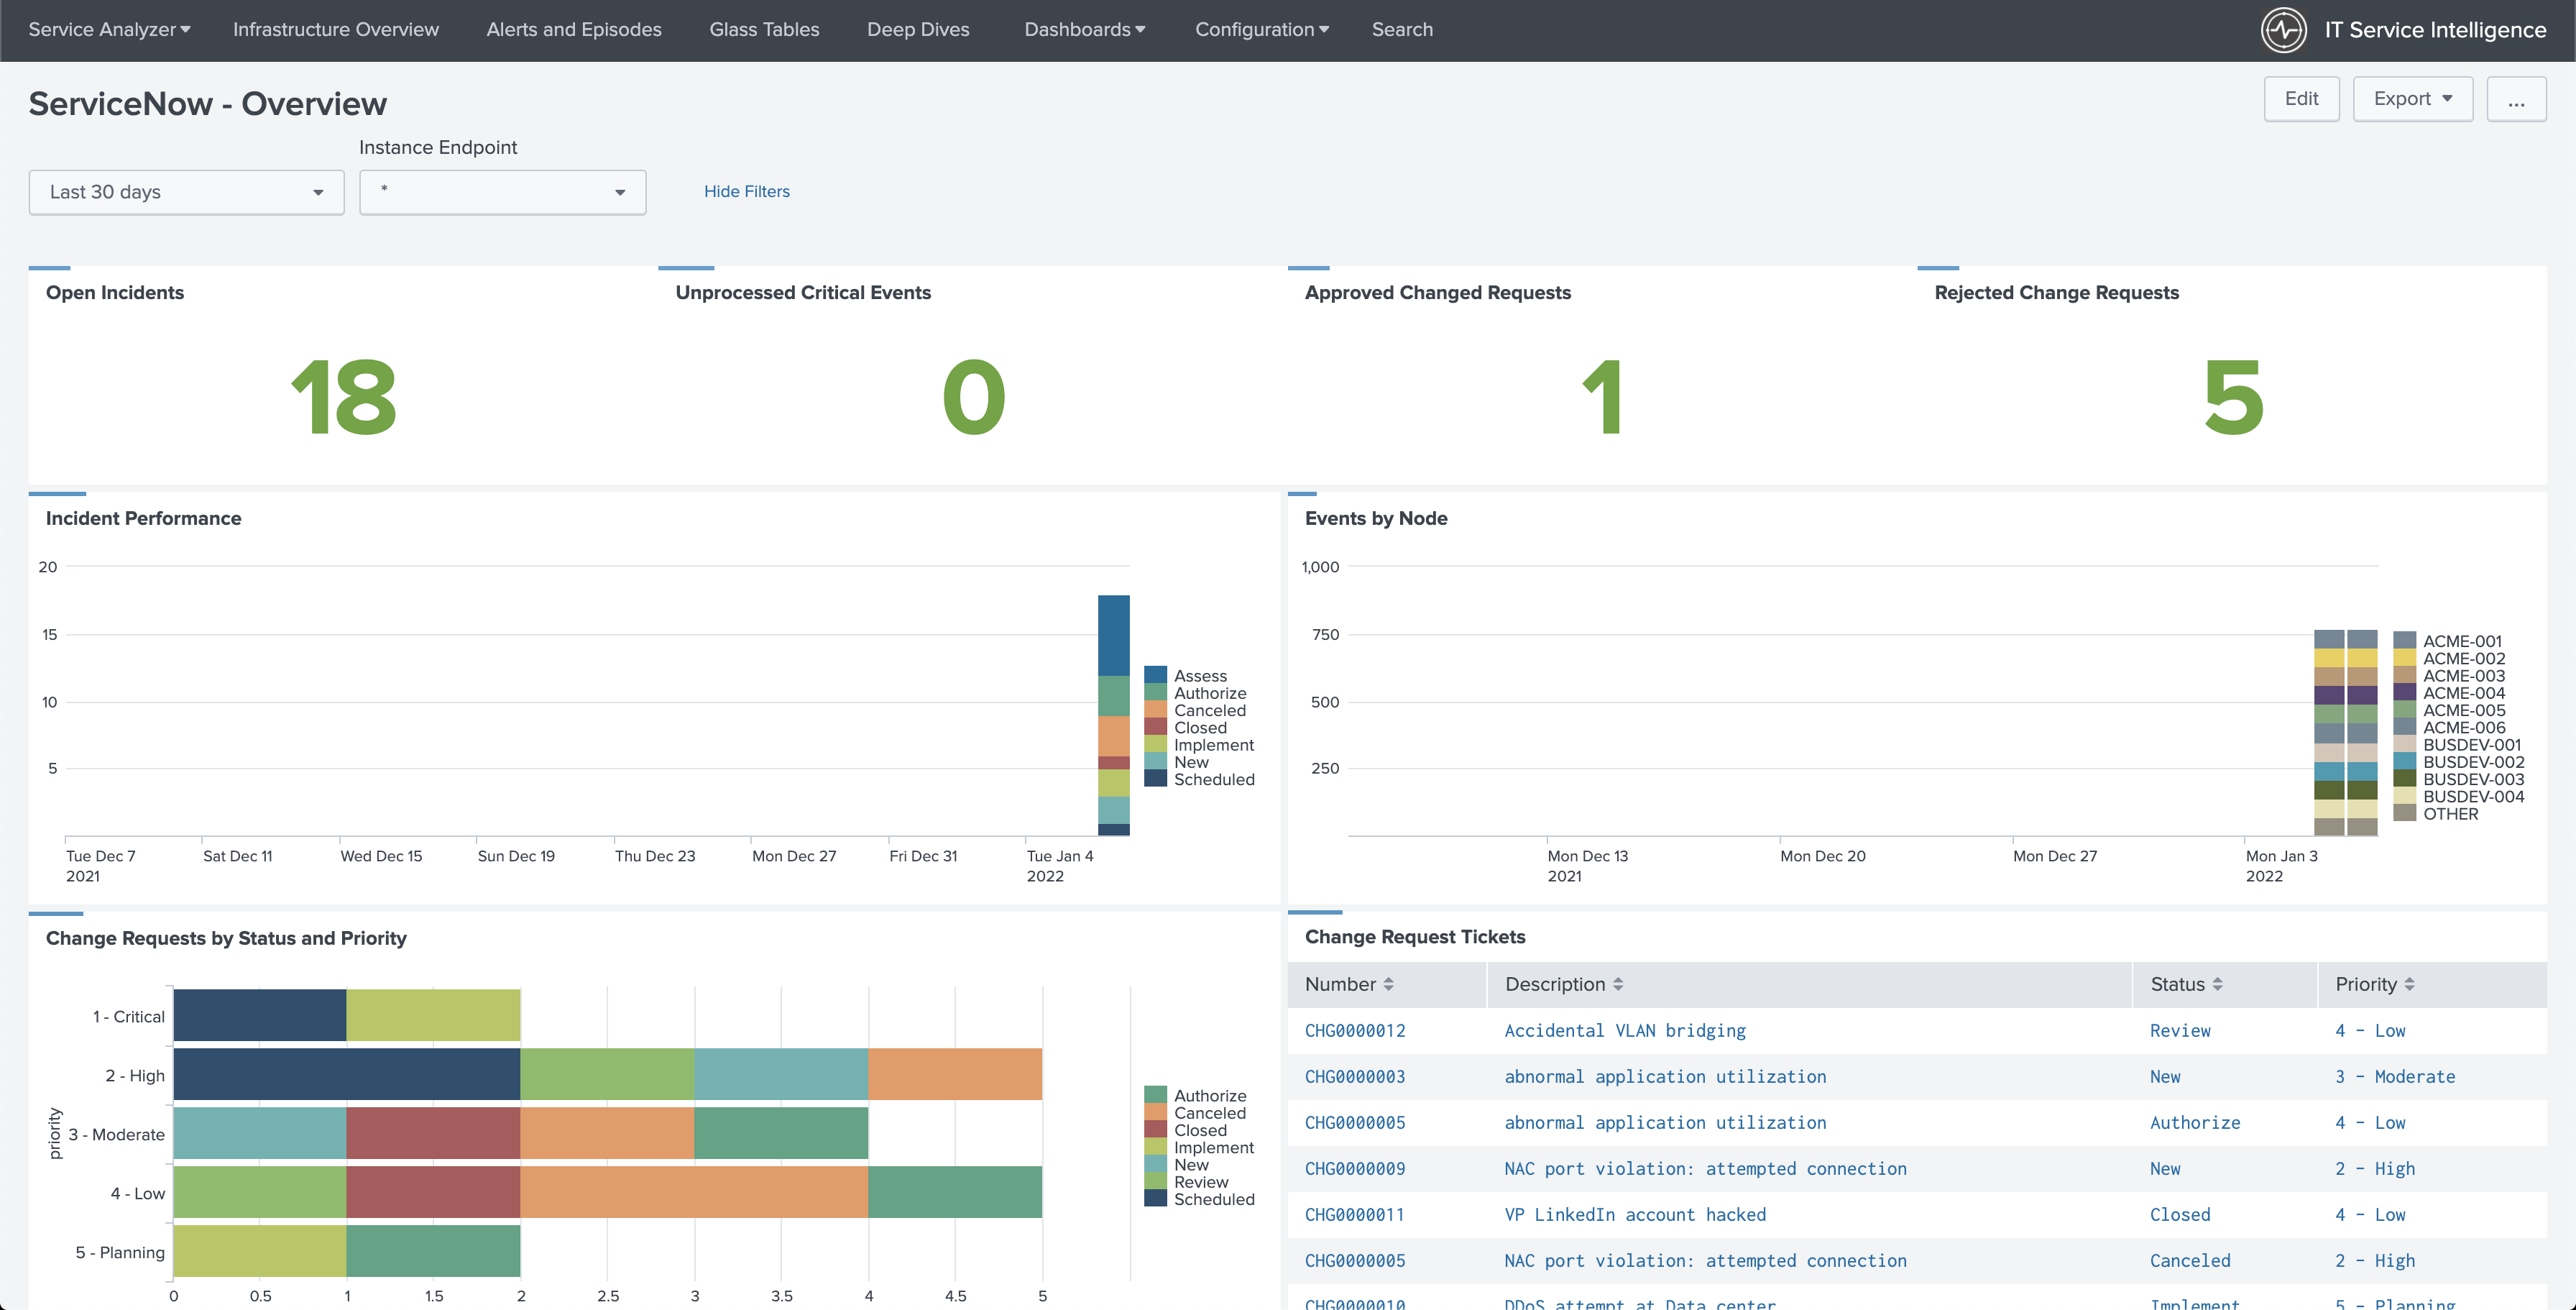 "Screenshot of the ServiceNow Overview Dashboard